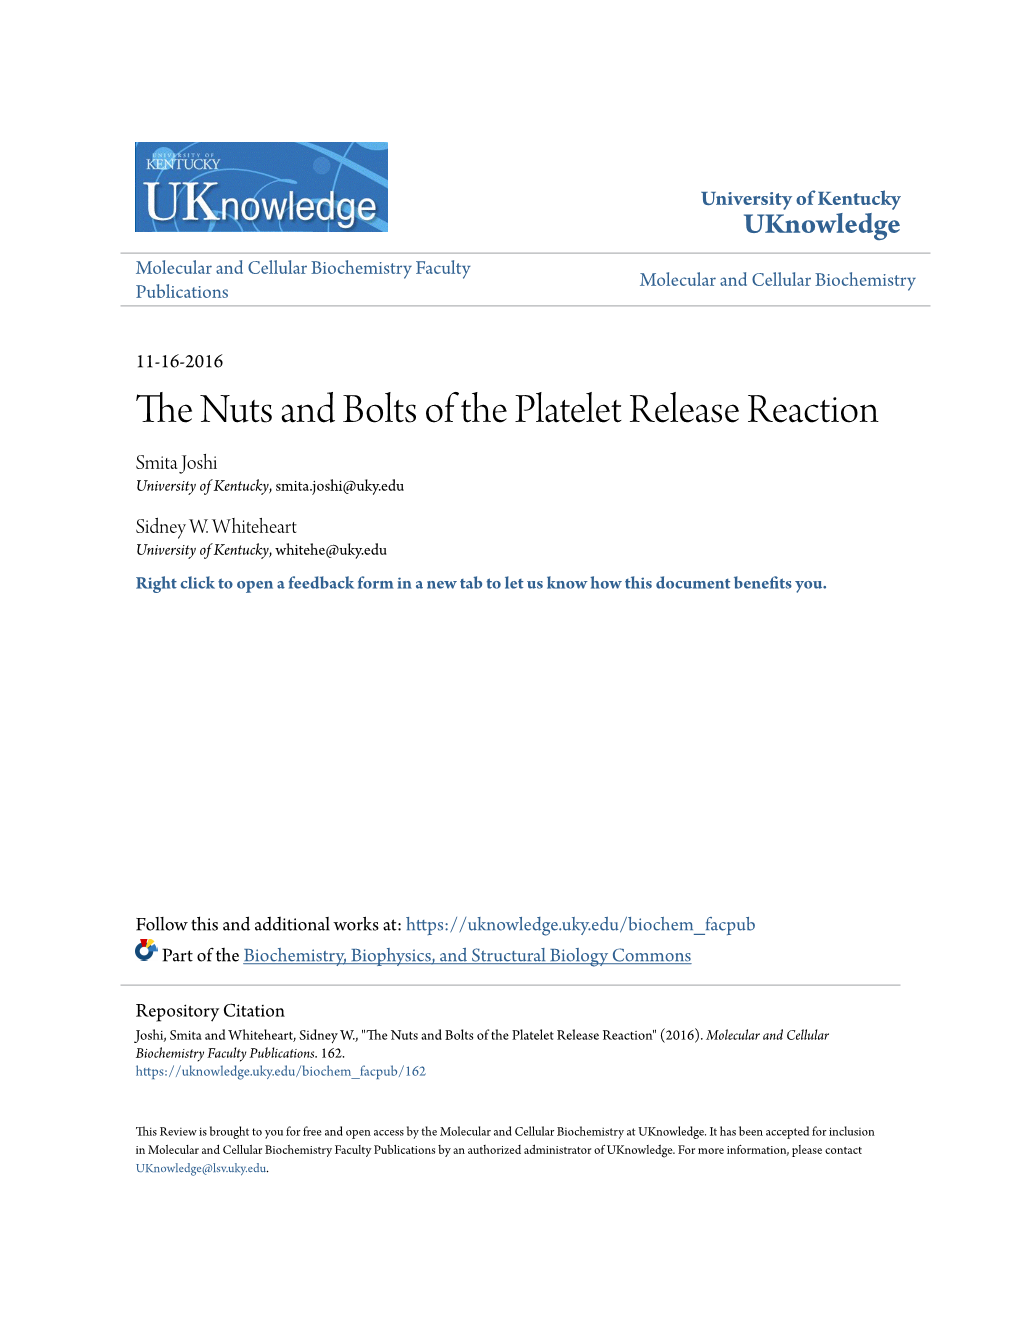 The Nuts and Bolts of the Platelet Release Reaction